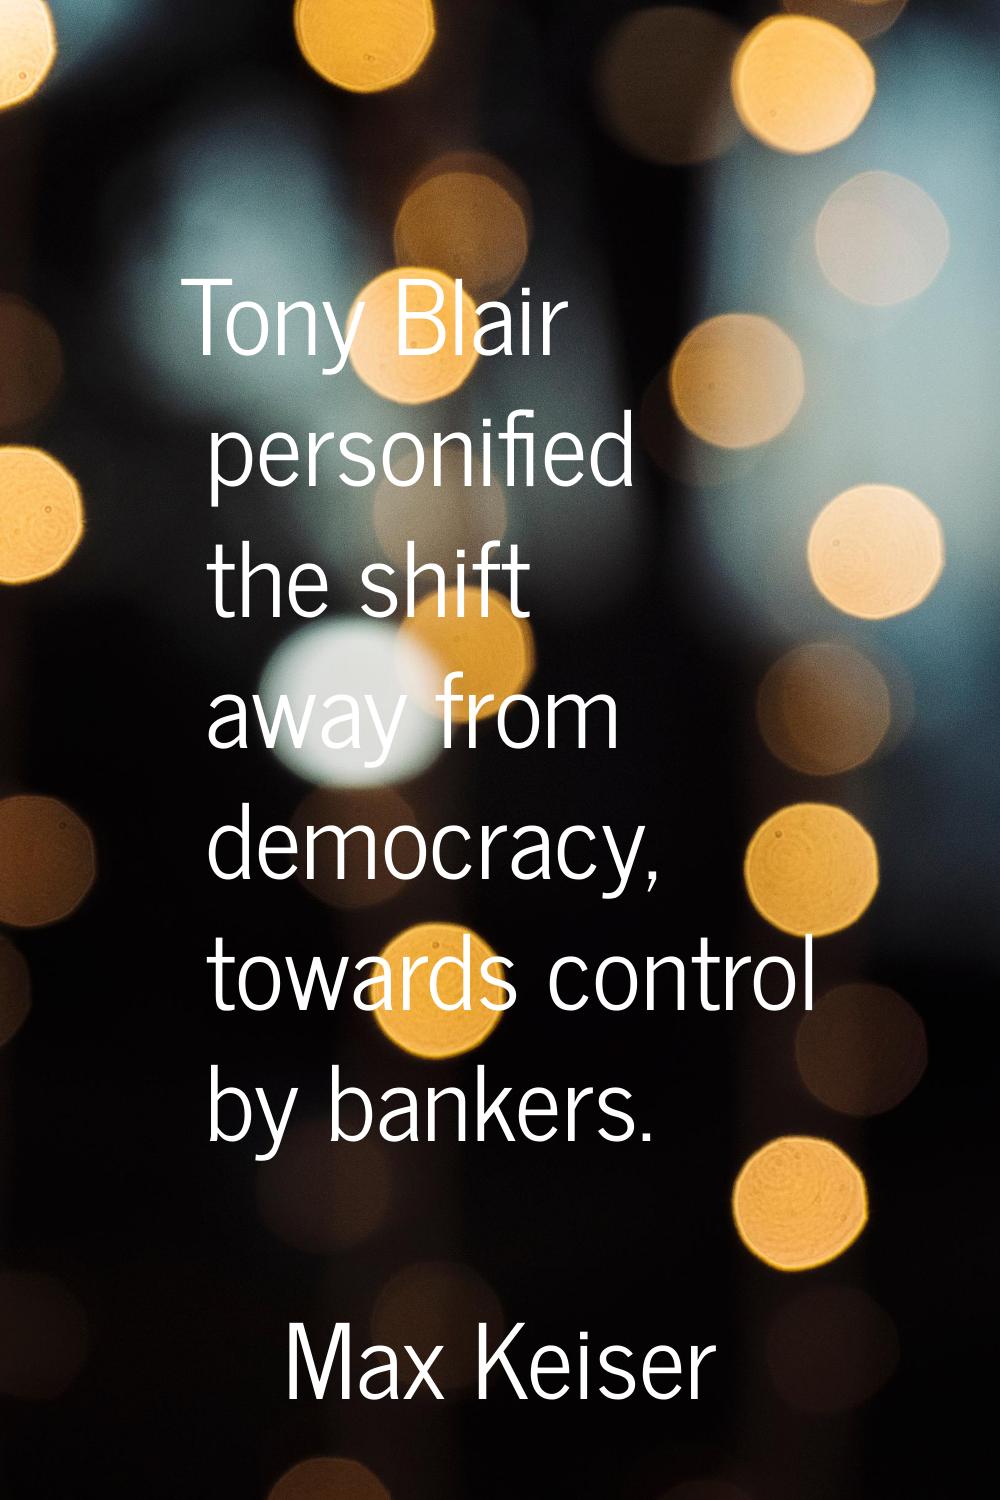 Tony Blair personified the shift away from democracy, towards control by bankers.